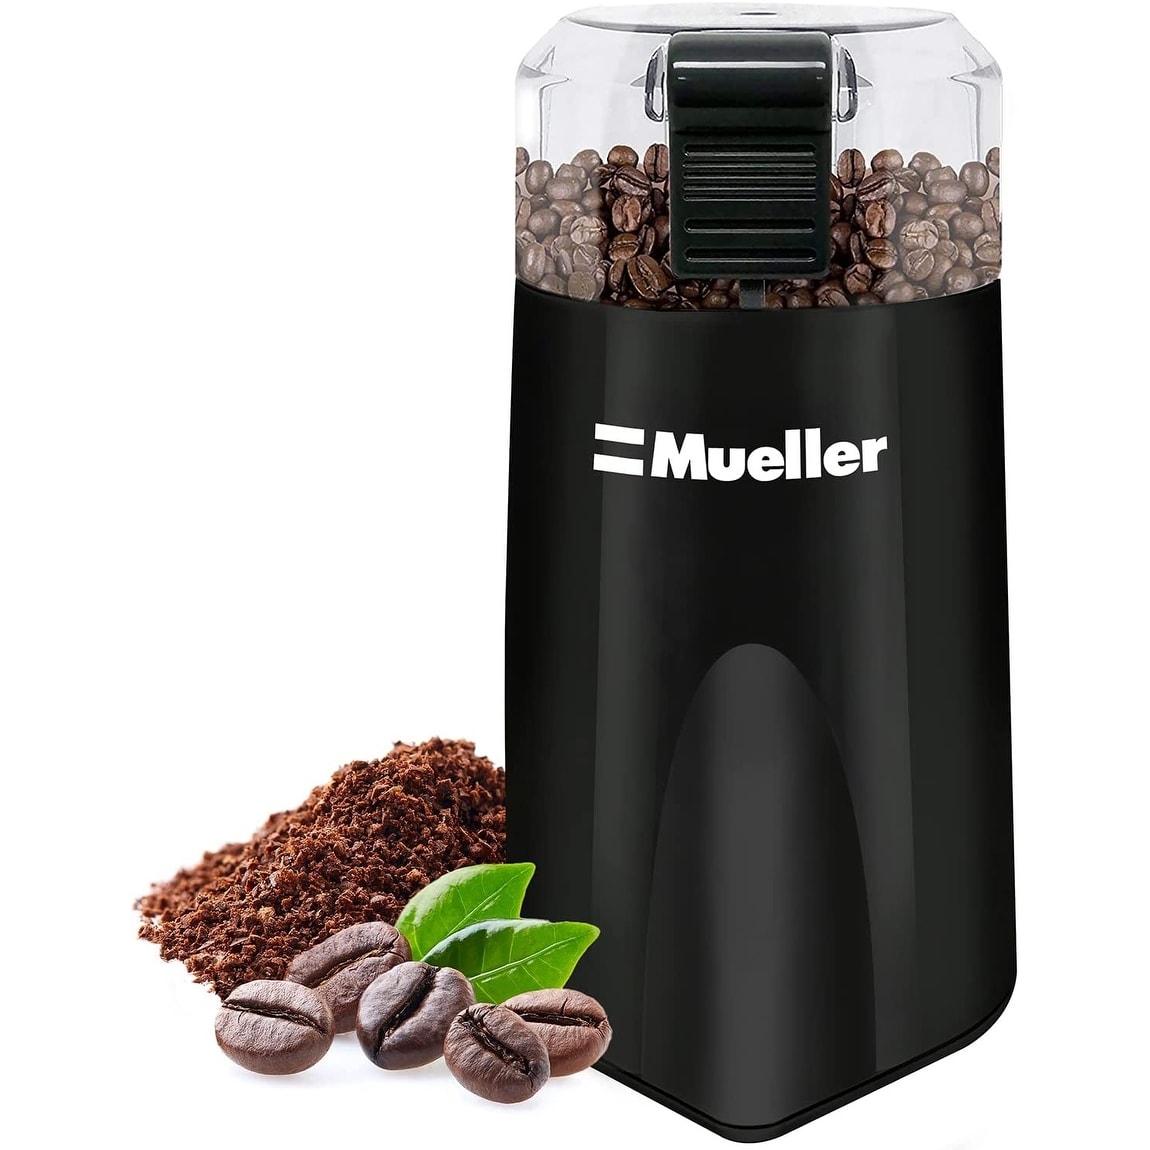 https://ak1.ostkcdn.com/images/products/is/images/direct/6bd8070fe6ad2ee7196ba11487fe277d581c0c9c/Mueller-Electric-Coffee-Grinder-Mill-with-Large-Grinding-Capacity---Black.jpg